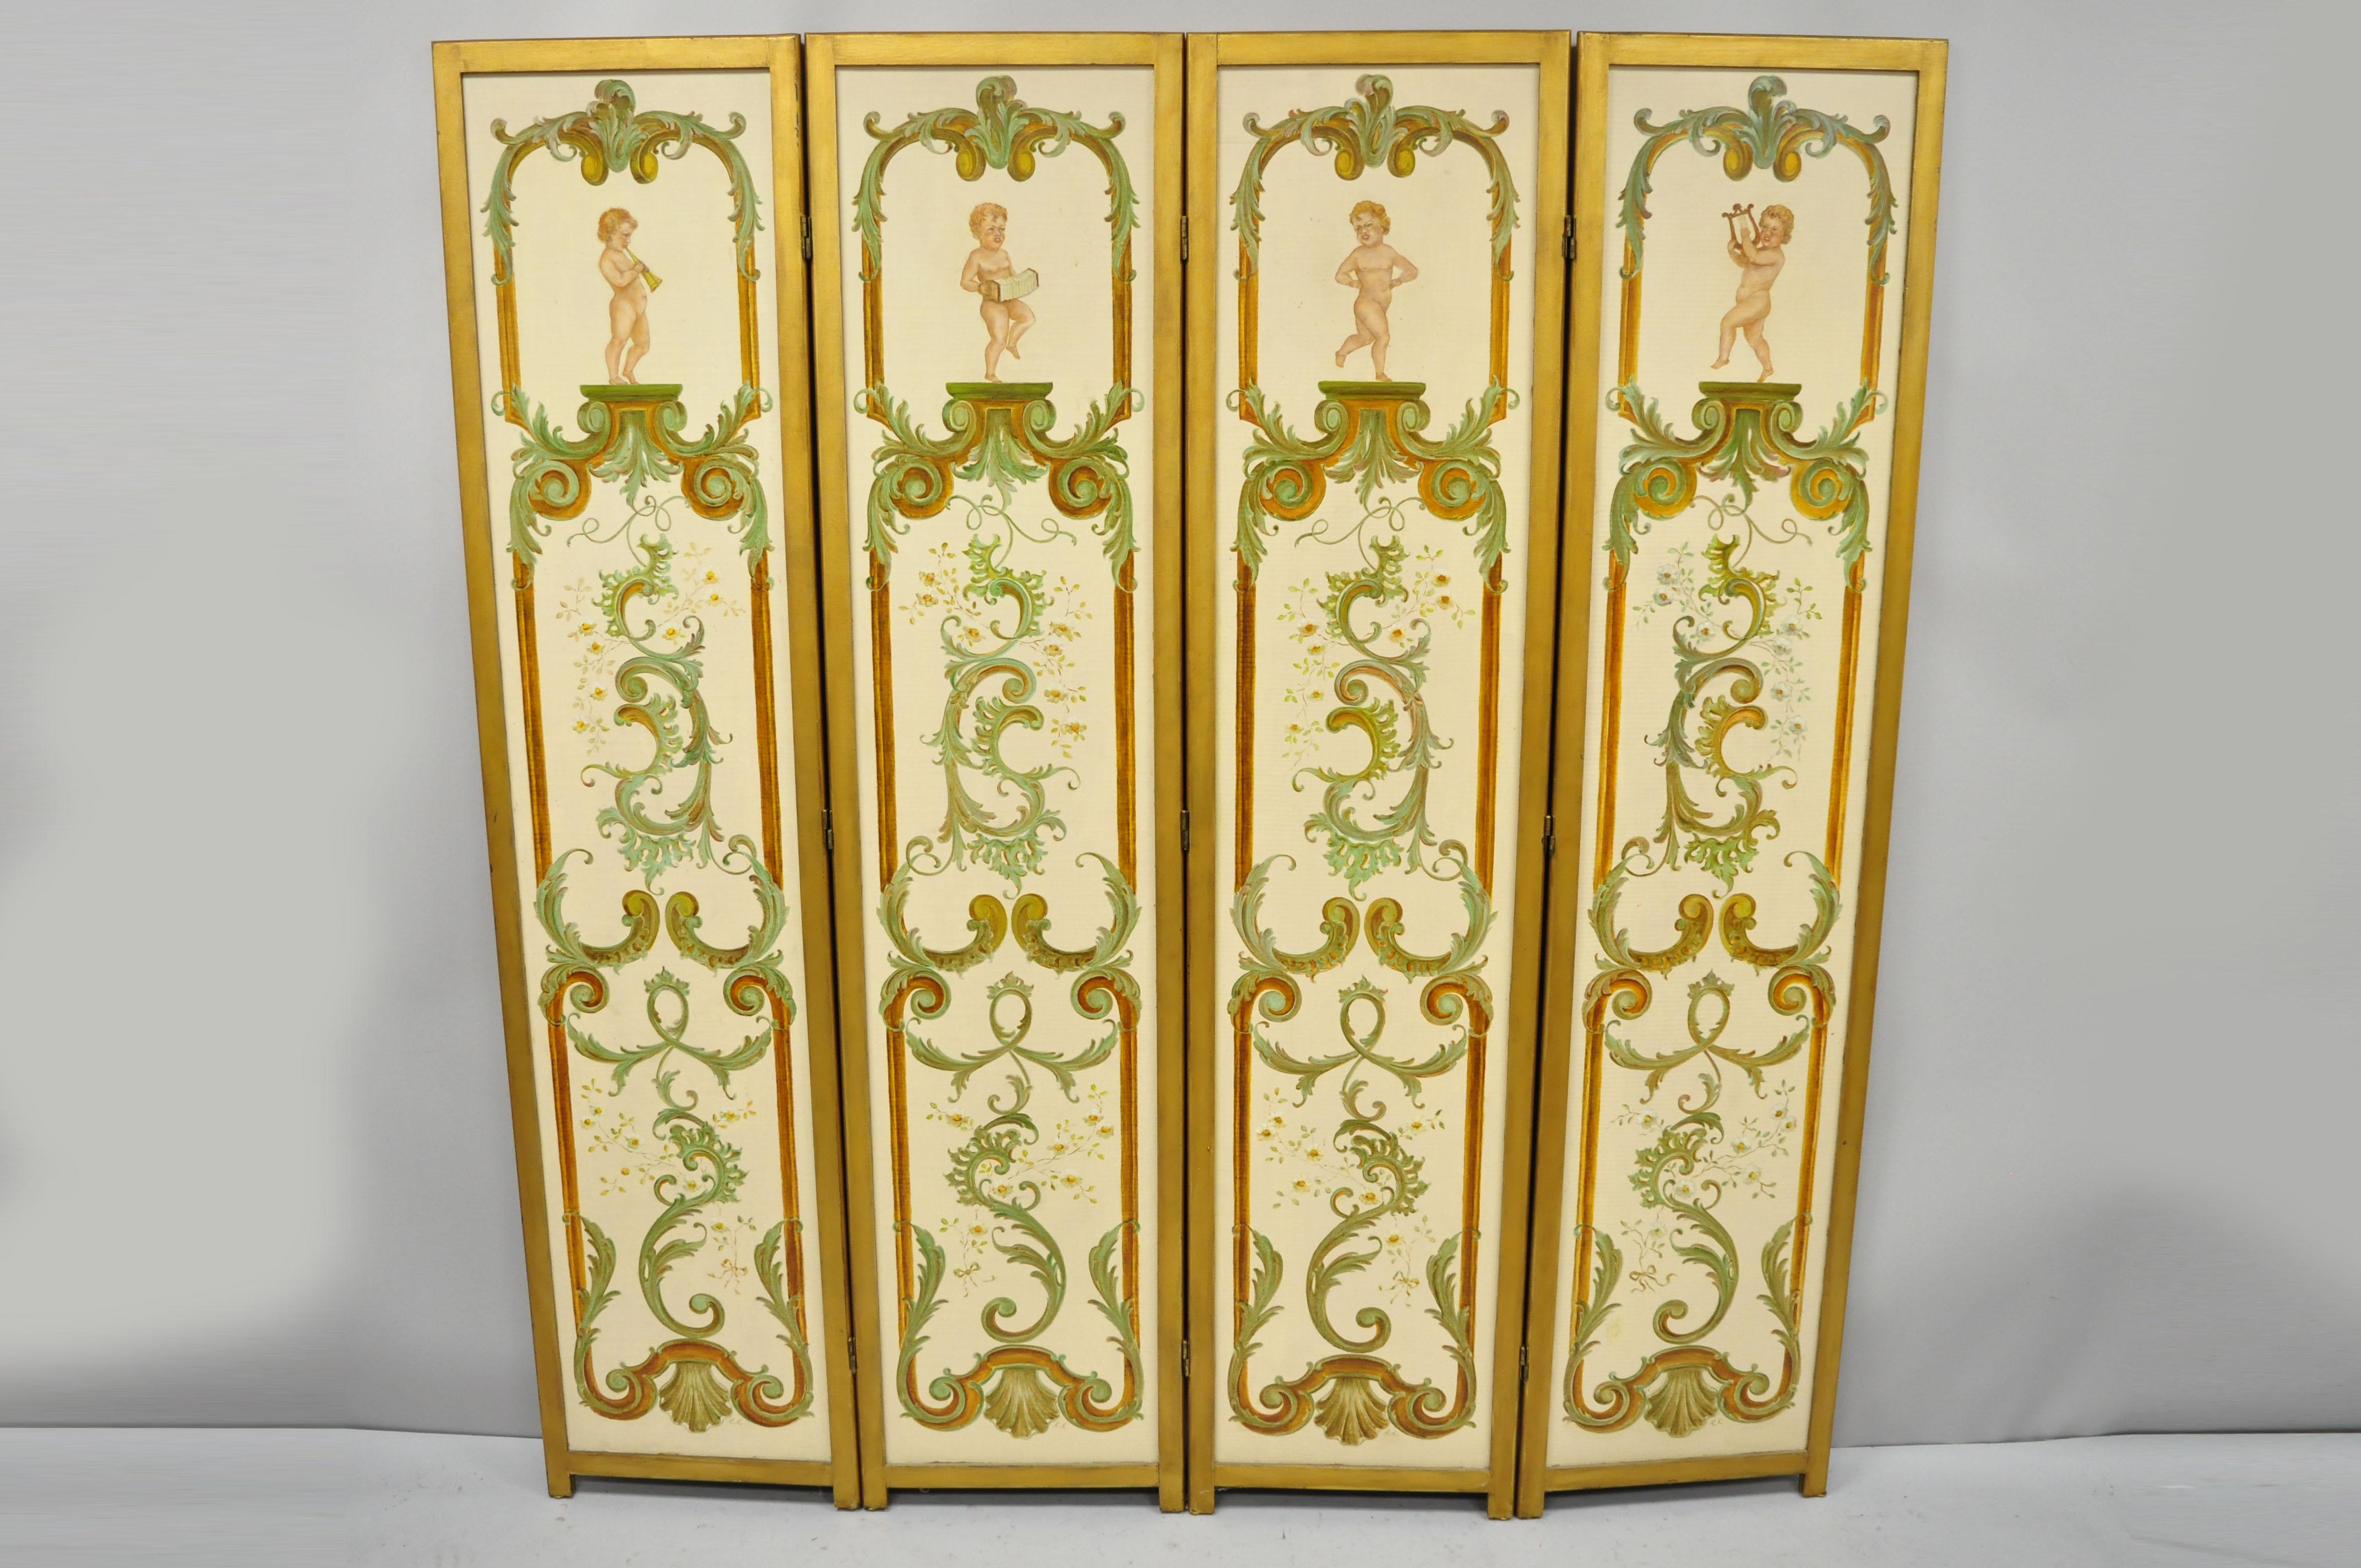 French Provincial Four Panel Hand Painted French Cherub Putti Musical Dressing Screen Room Divider